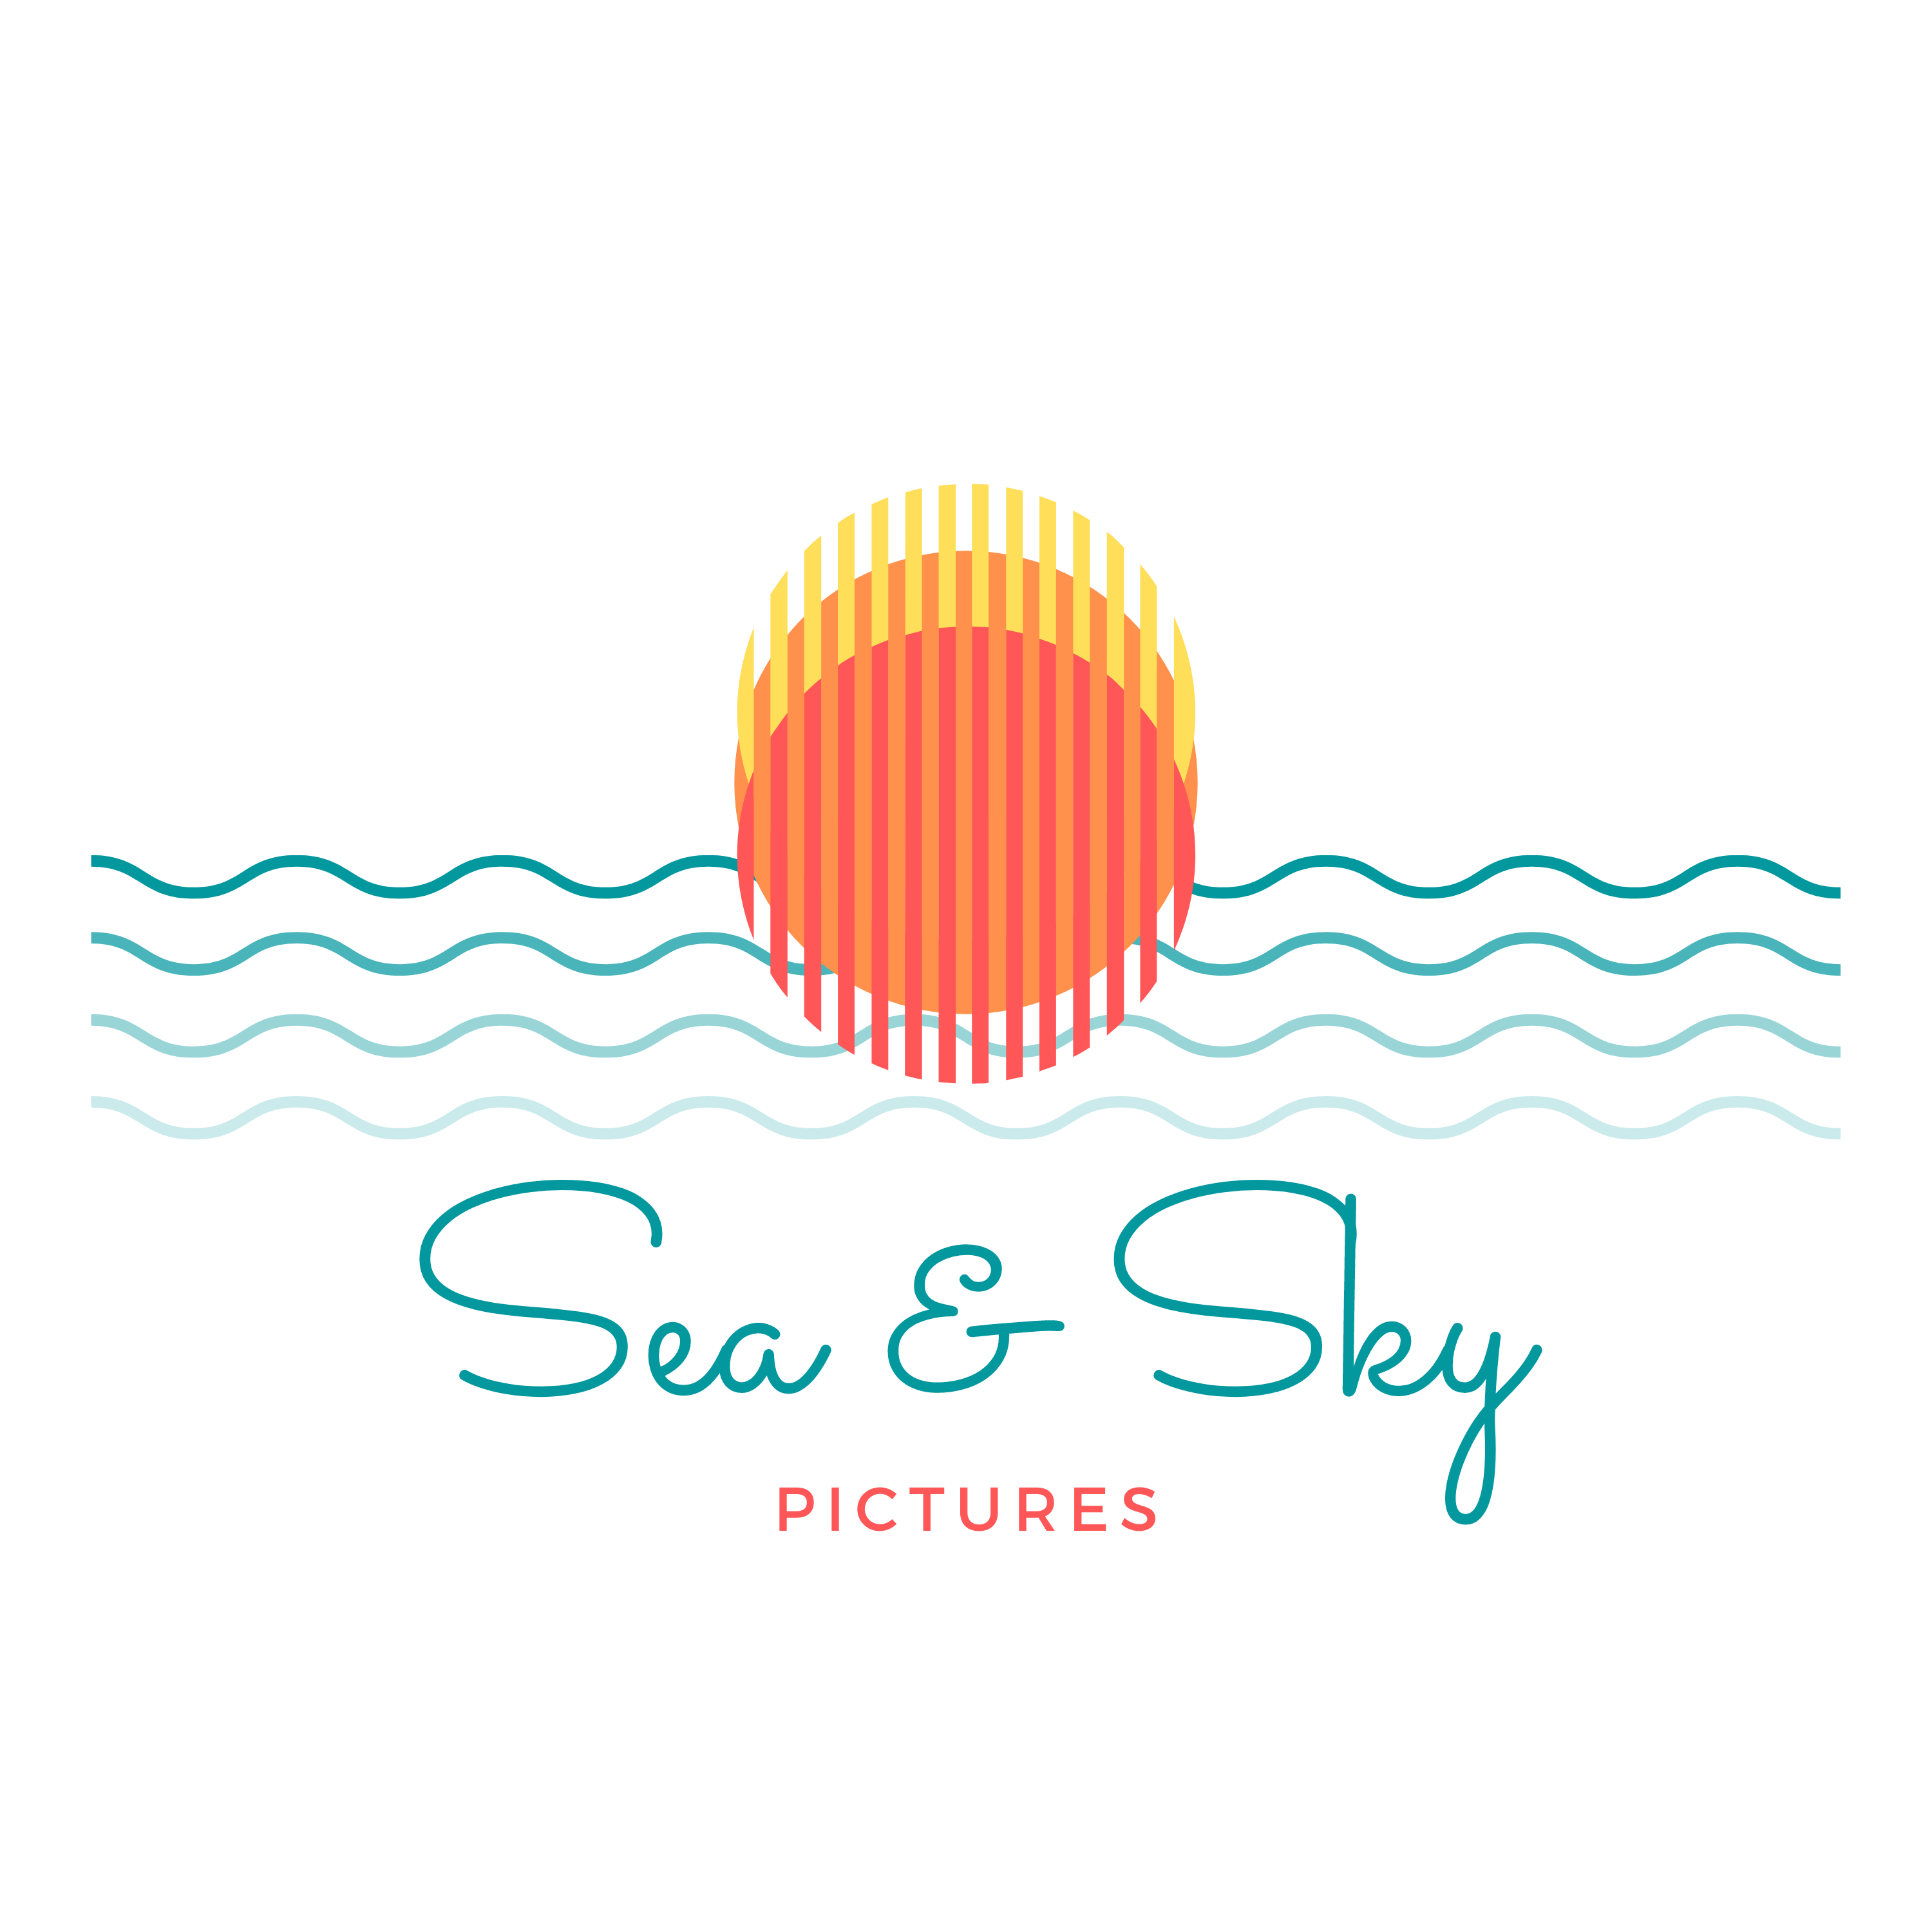 https://northeastscreen.org/wp-content/uploads/2023/04/Sea-and-Sky-Pictures-logo.png